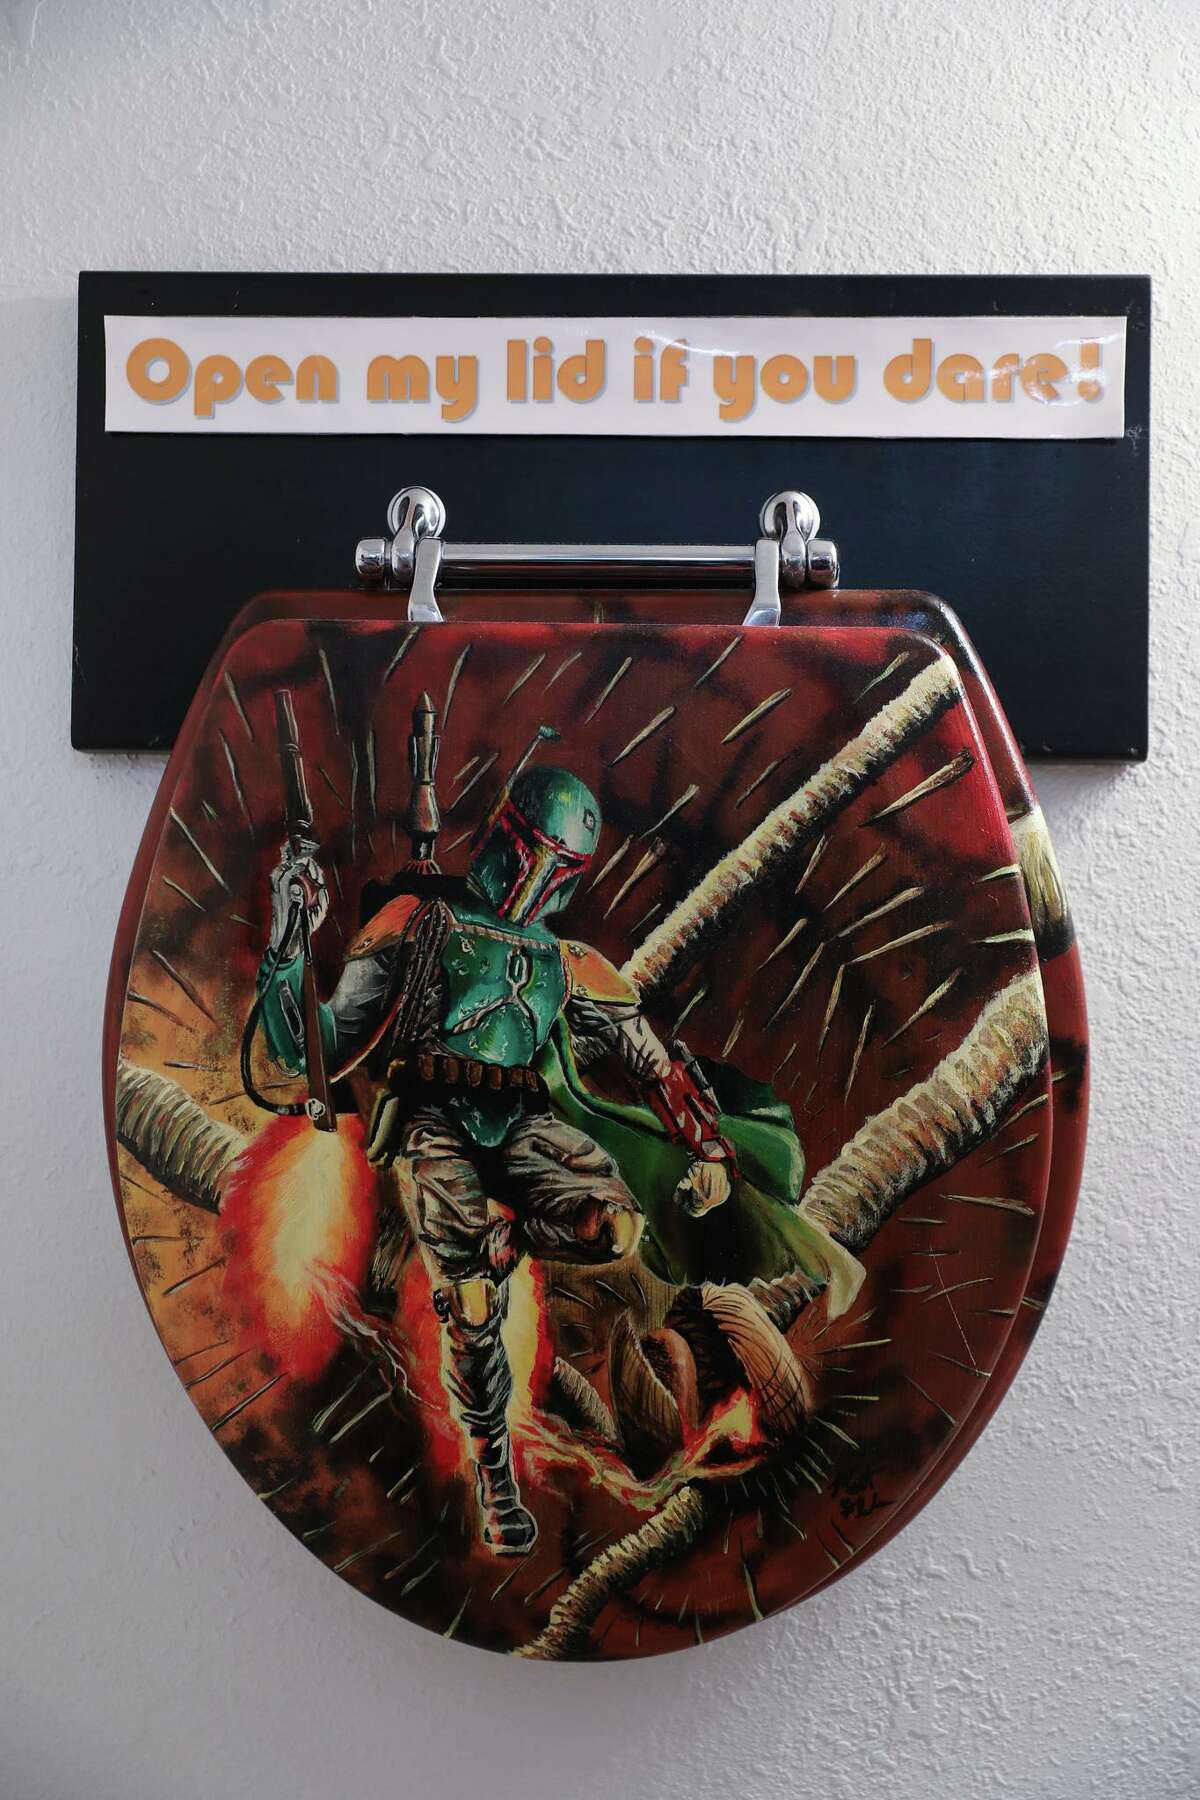 A toilet seat featuring Boba Fett hangs on the bathroom wall at Rancho Obi-Wan. The museum has items ranging form the original “Star Wars” trilogy to the recent “Mandalorian” TV series.